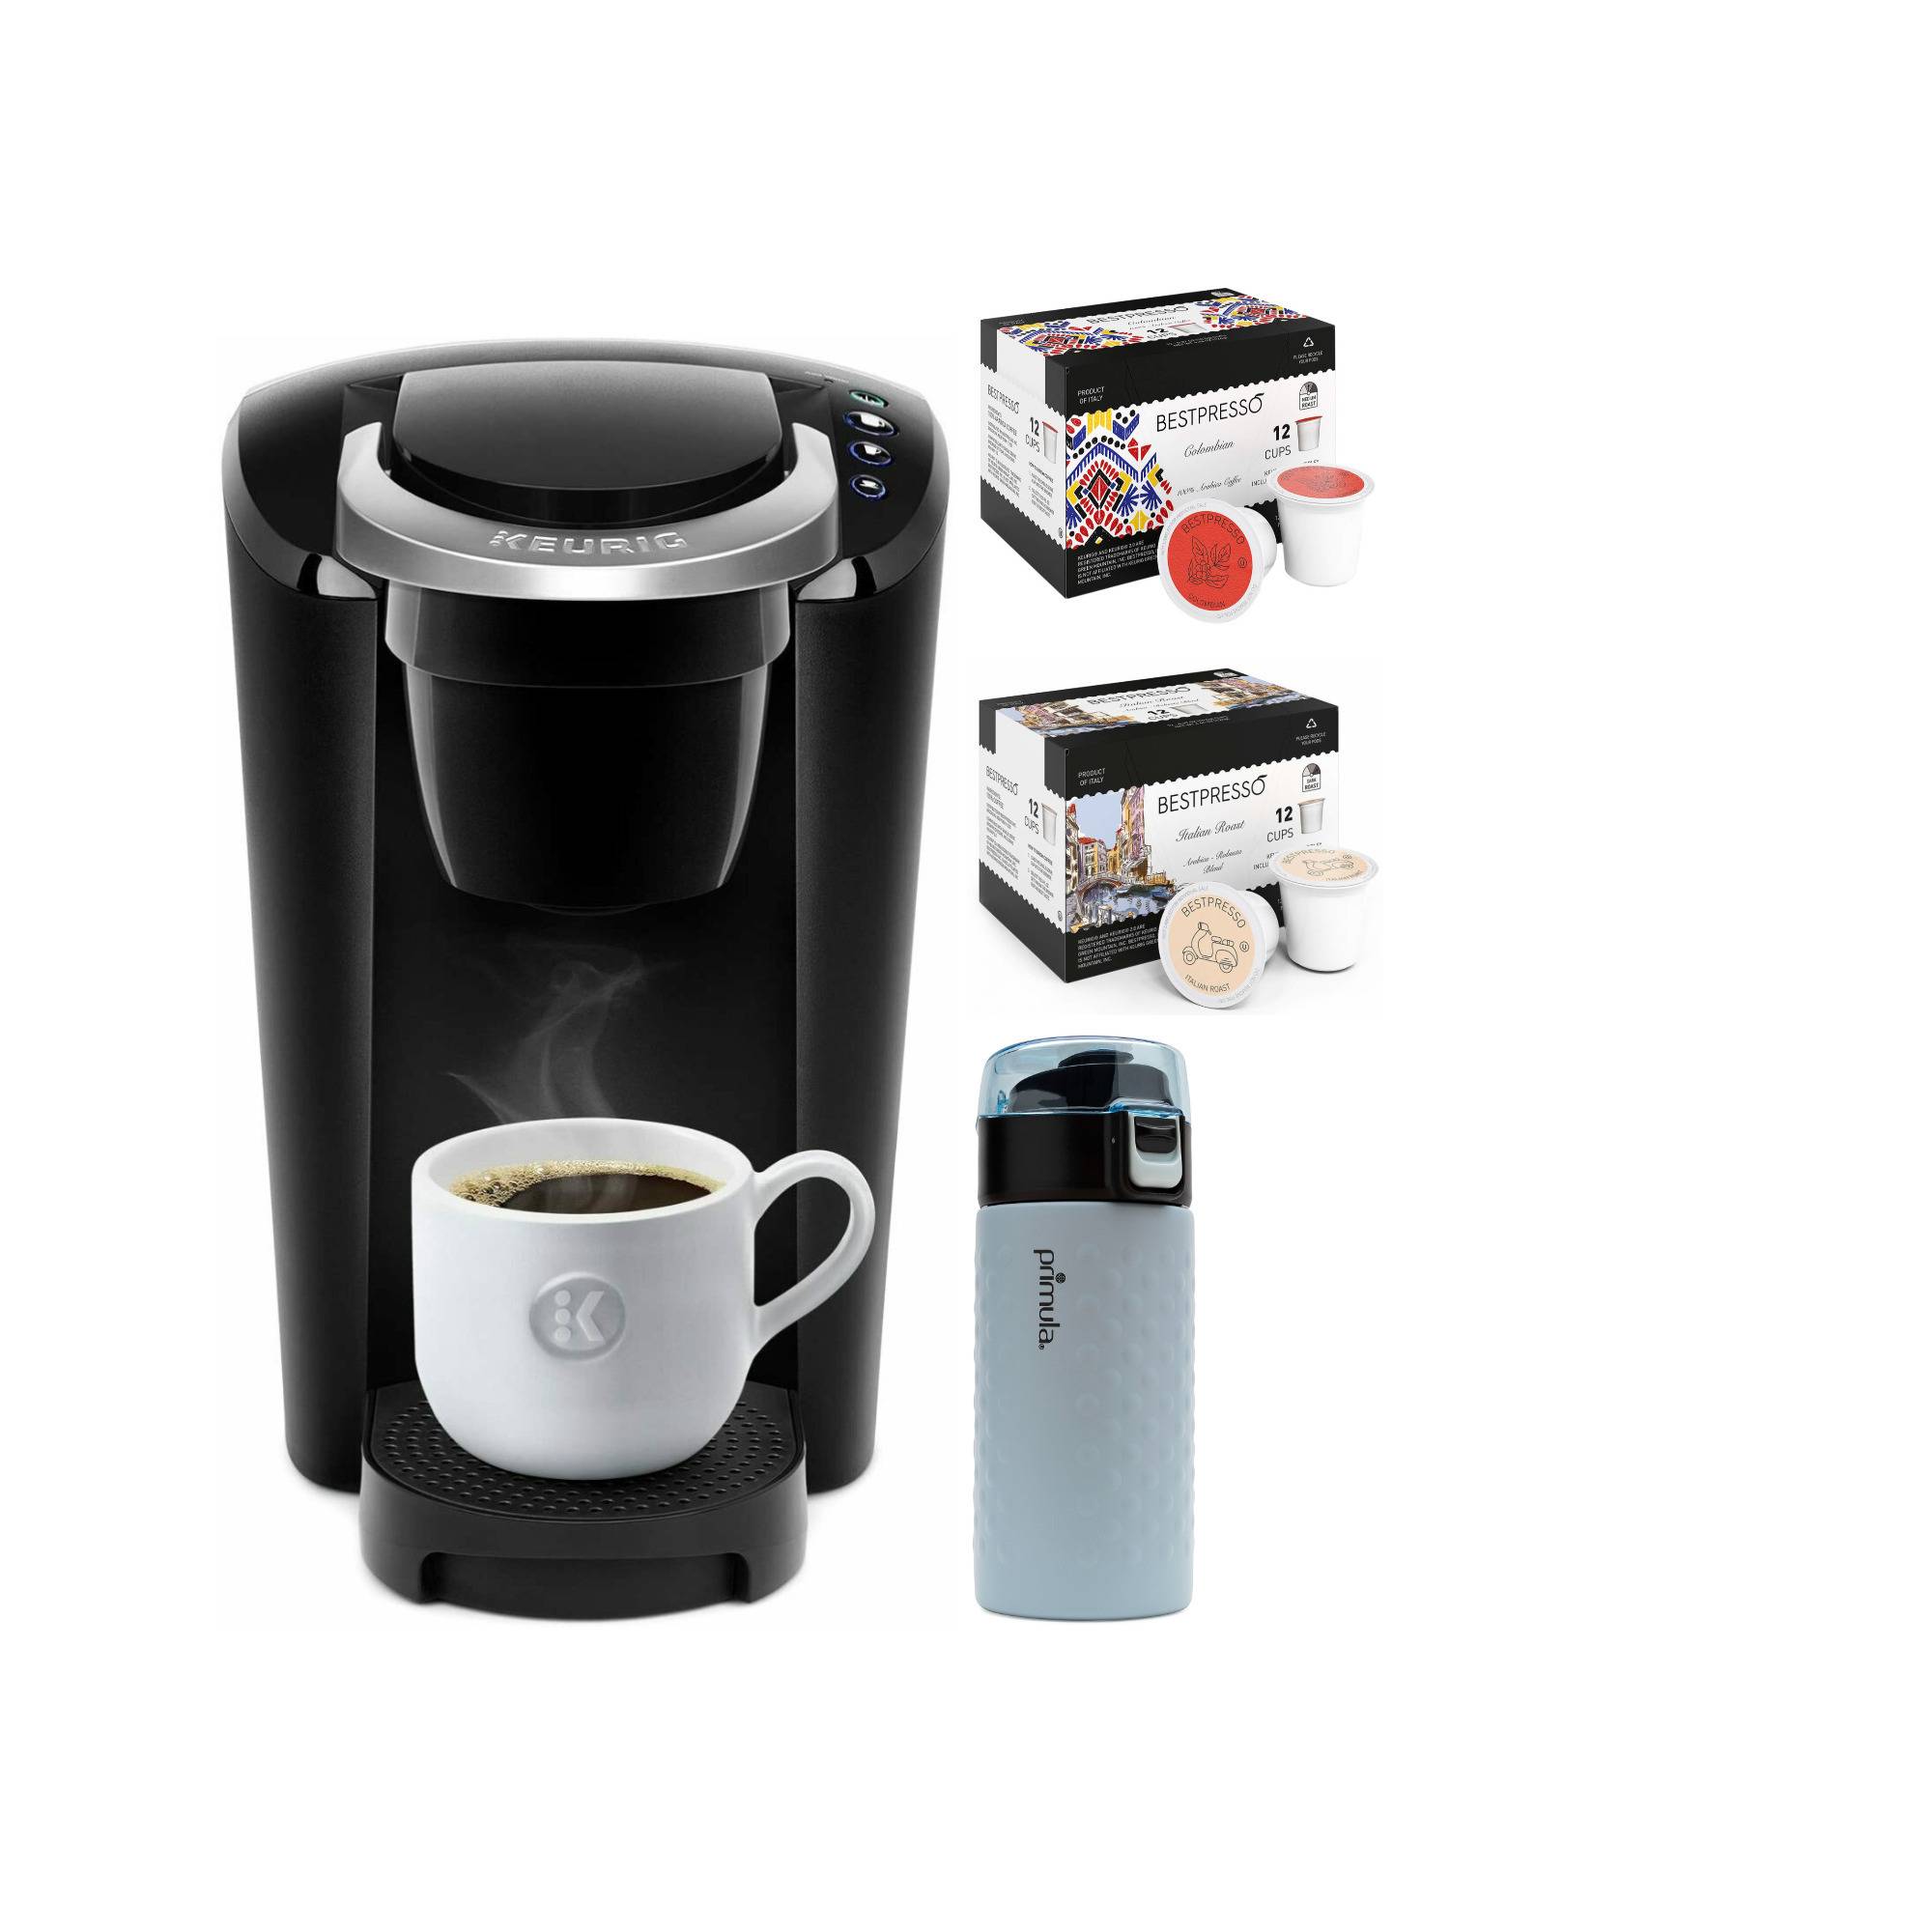 Keurig K-Compact Single Serve Coffee Maker with 24-Count Single Serve K-Cups and Tumbler Bundle